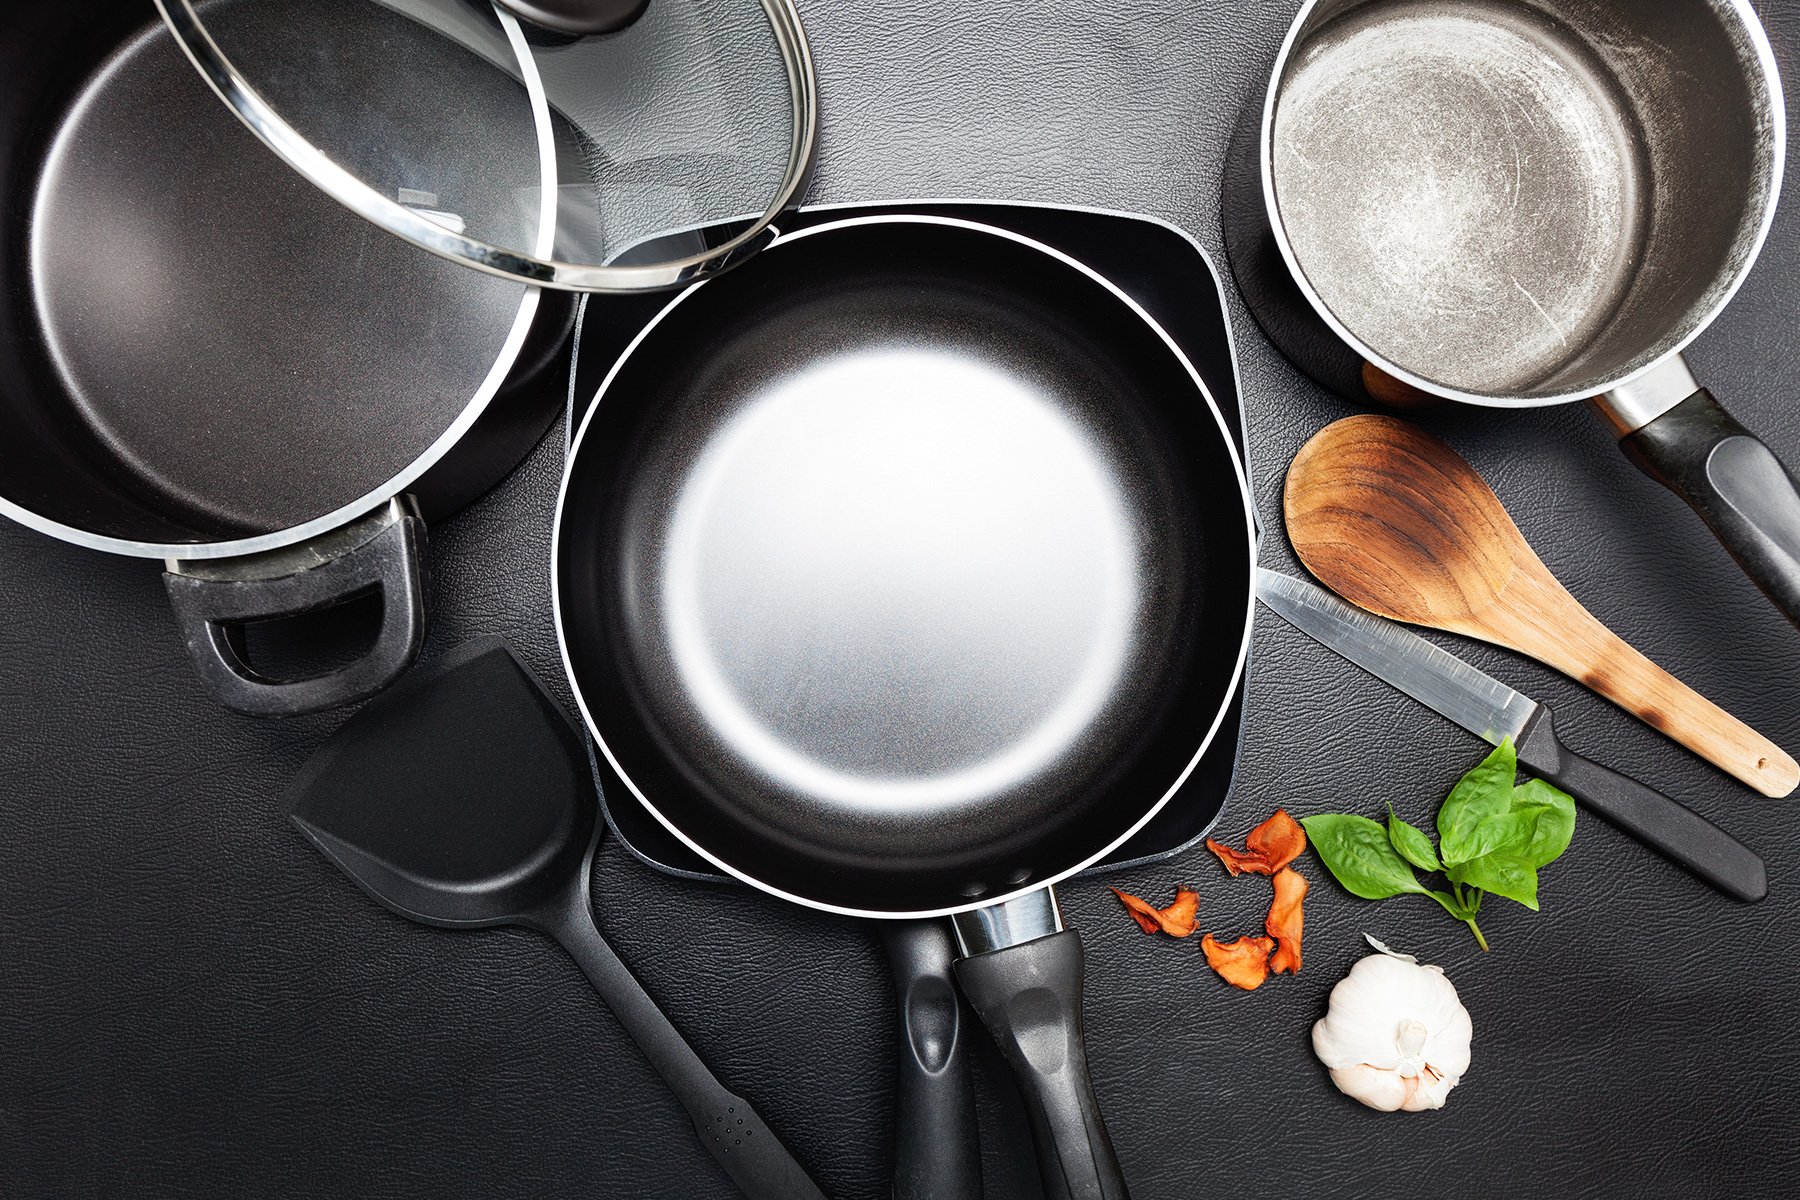 Chef's Guide to Commercial-Grade Professional Cookware